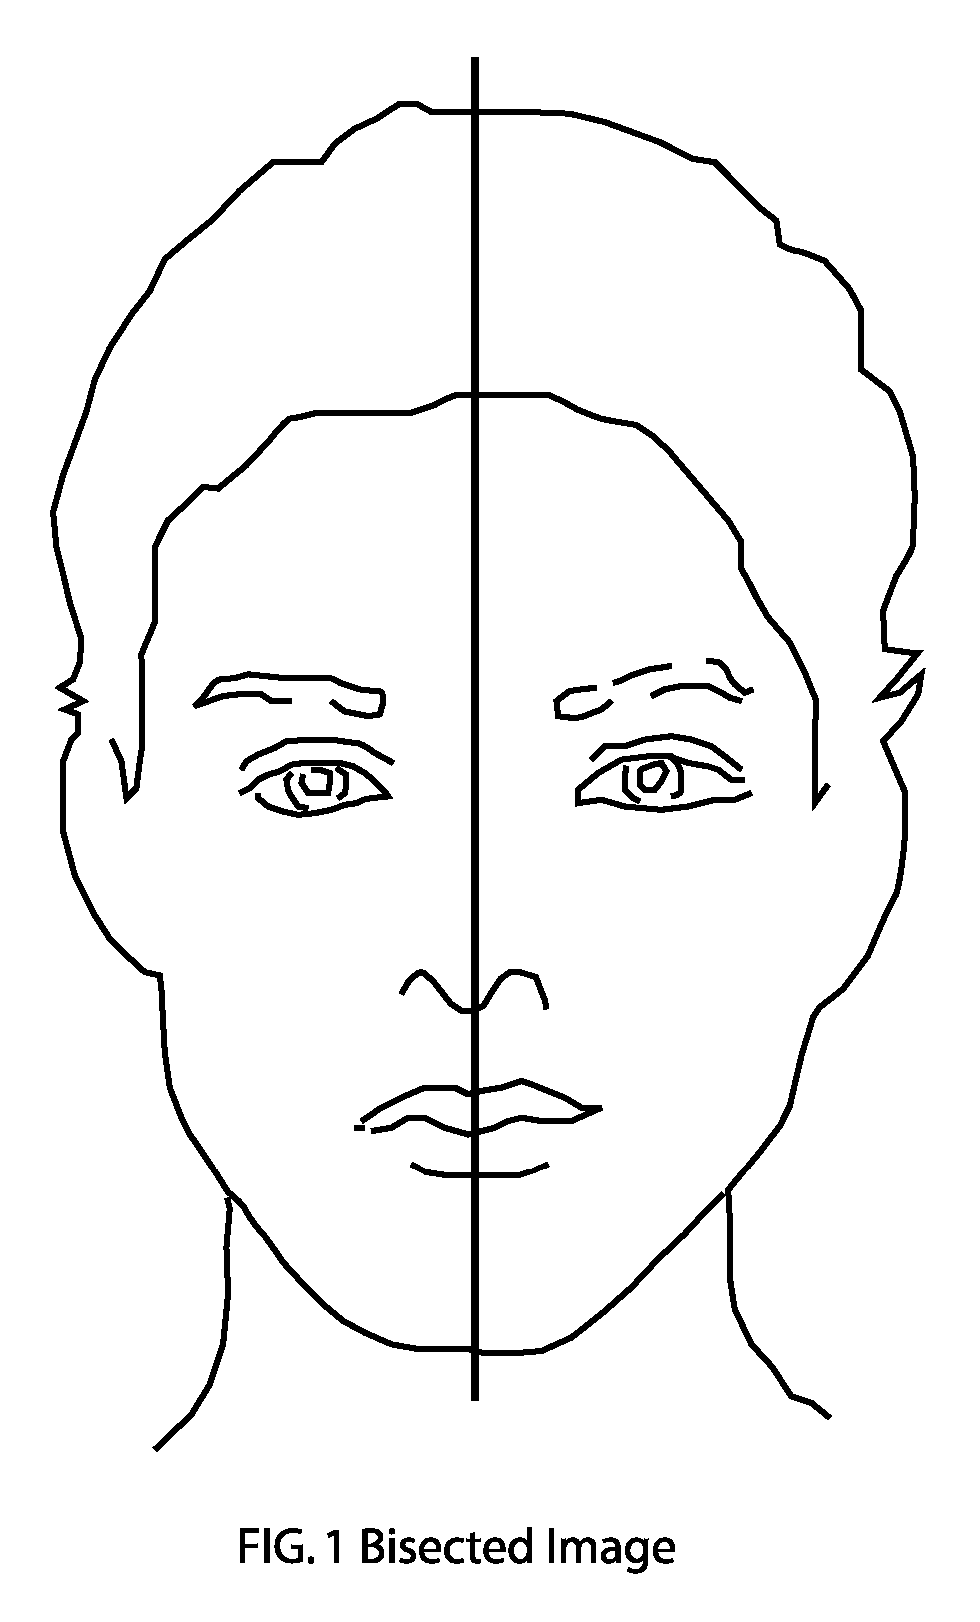 Methods Of Analyzing Human Facial Symmetry And Balance To Provide Beauty Advice